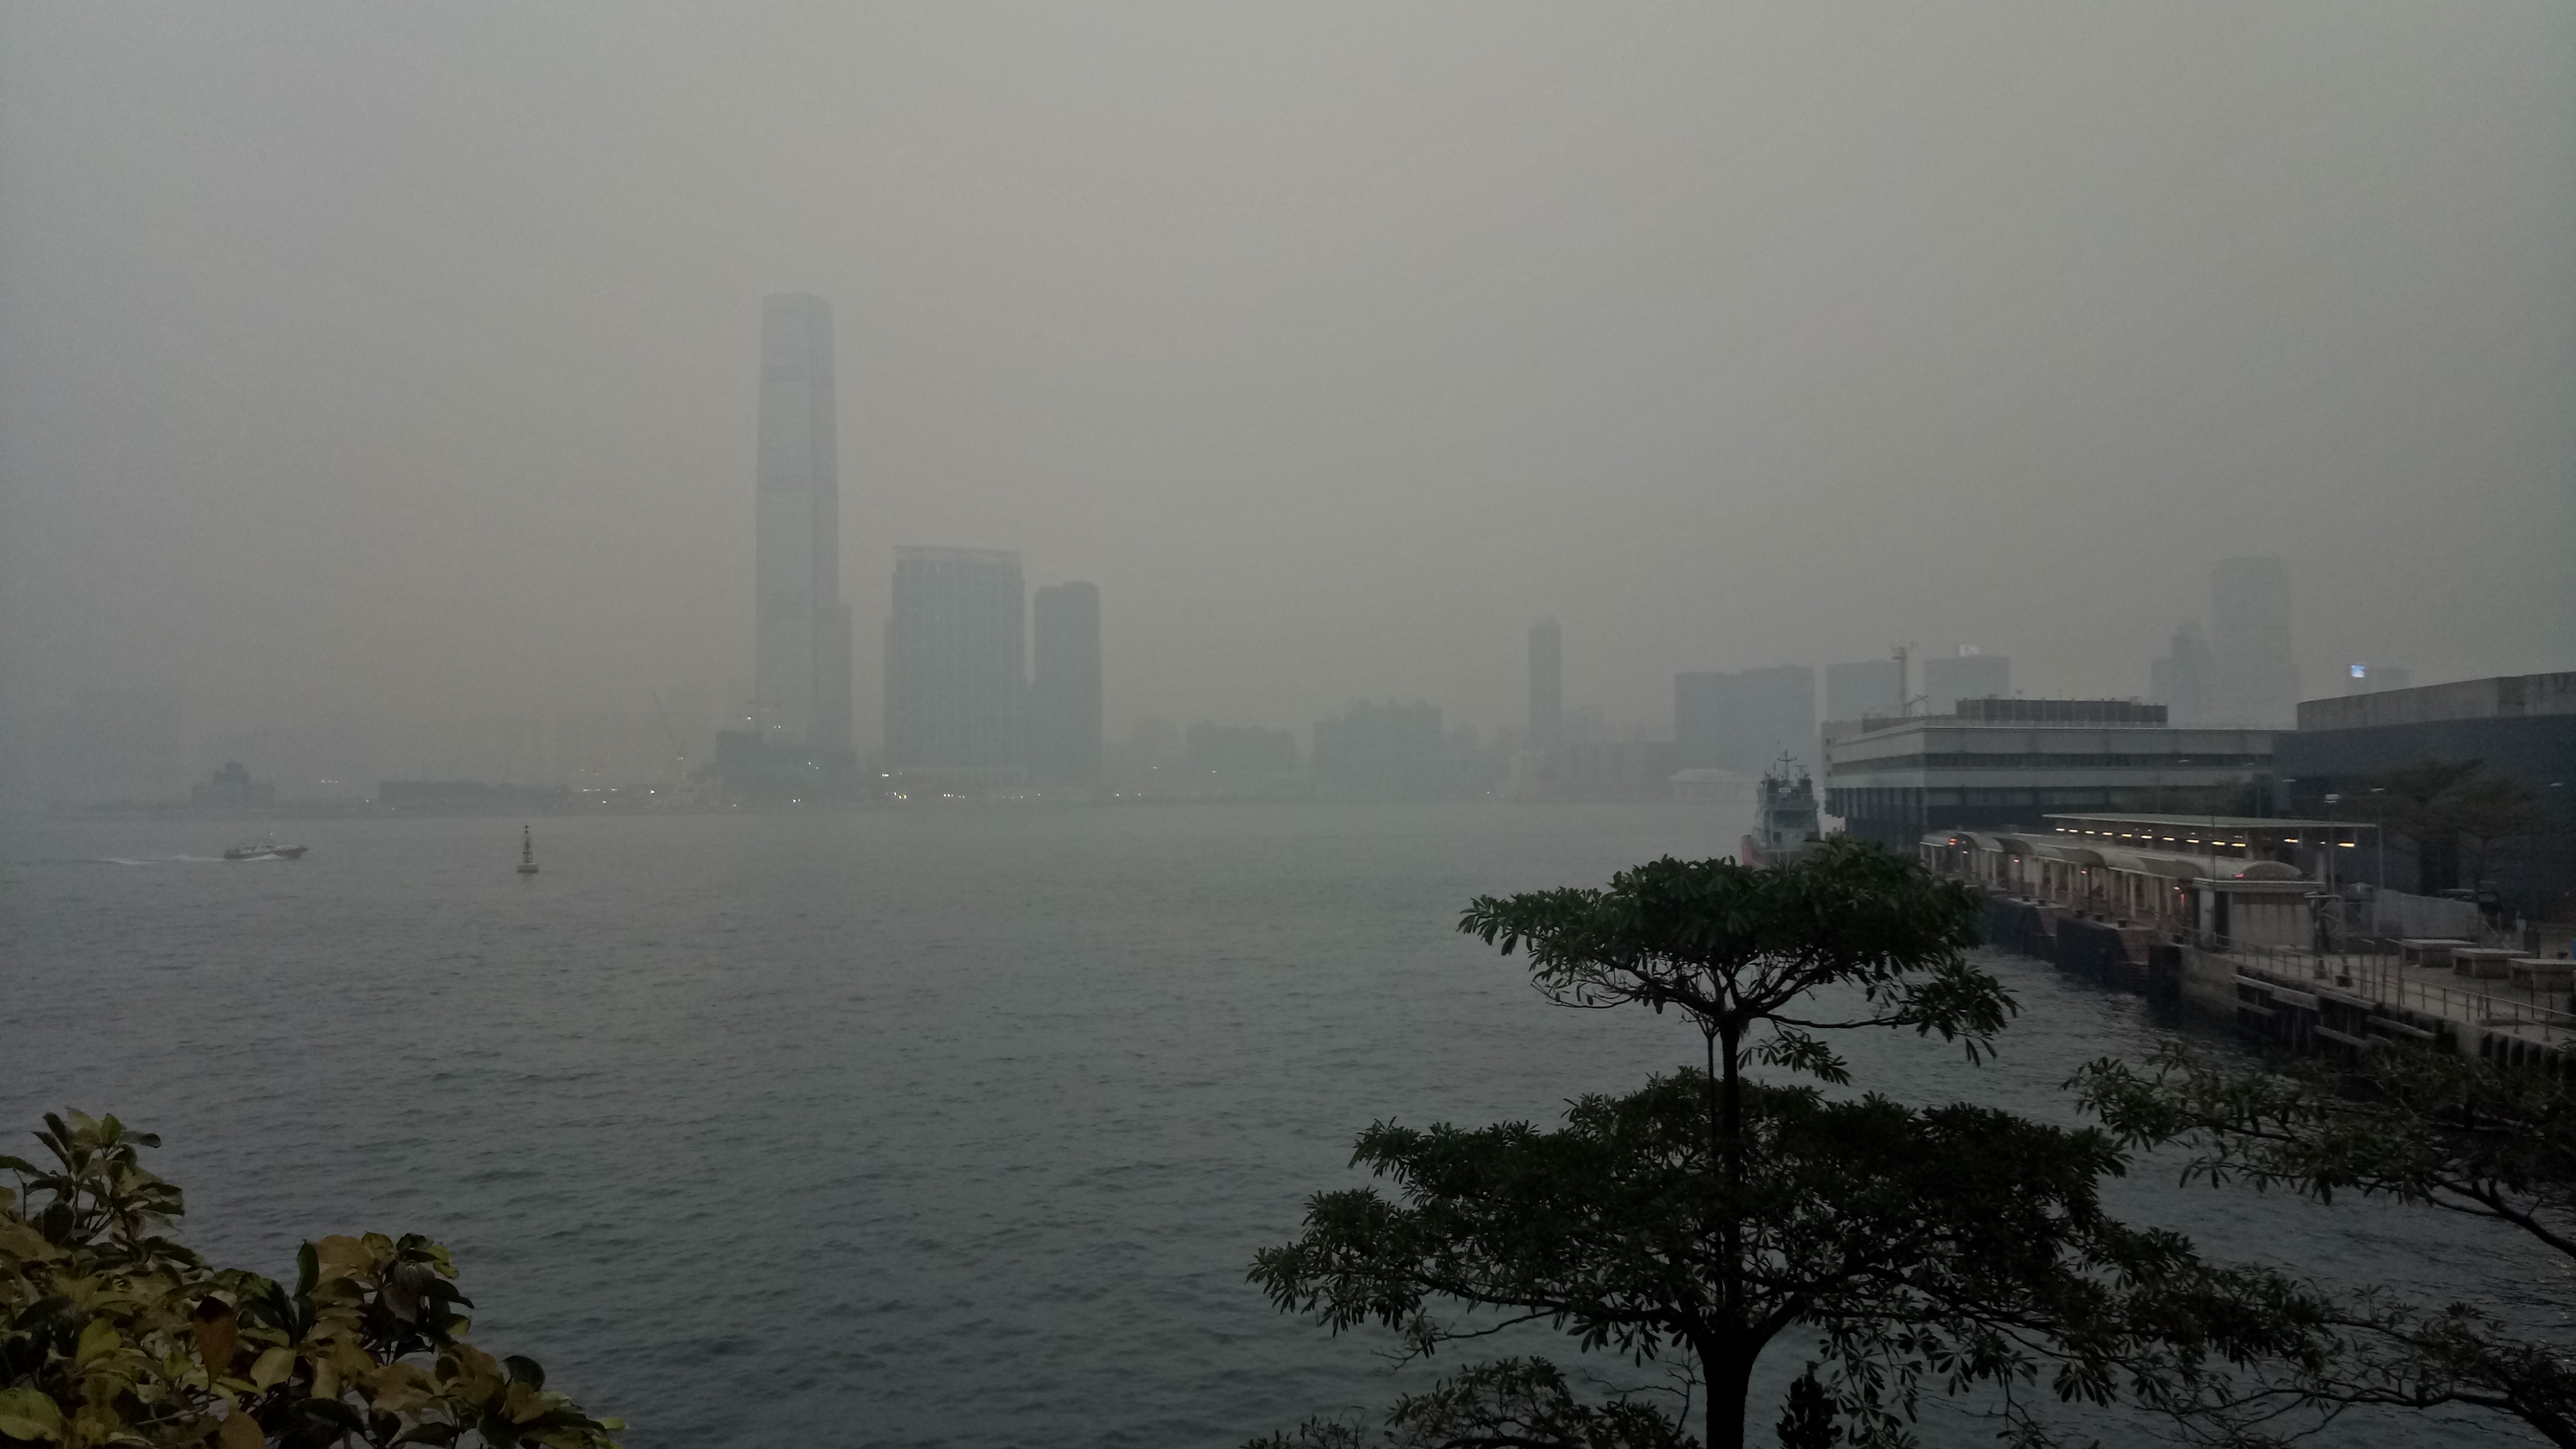 Looking across Victoria Harbour toward the smog-shrouded ICC building on Monday, Jan 22 